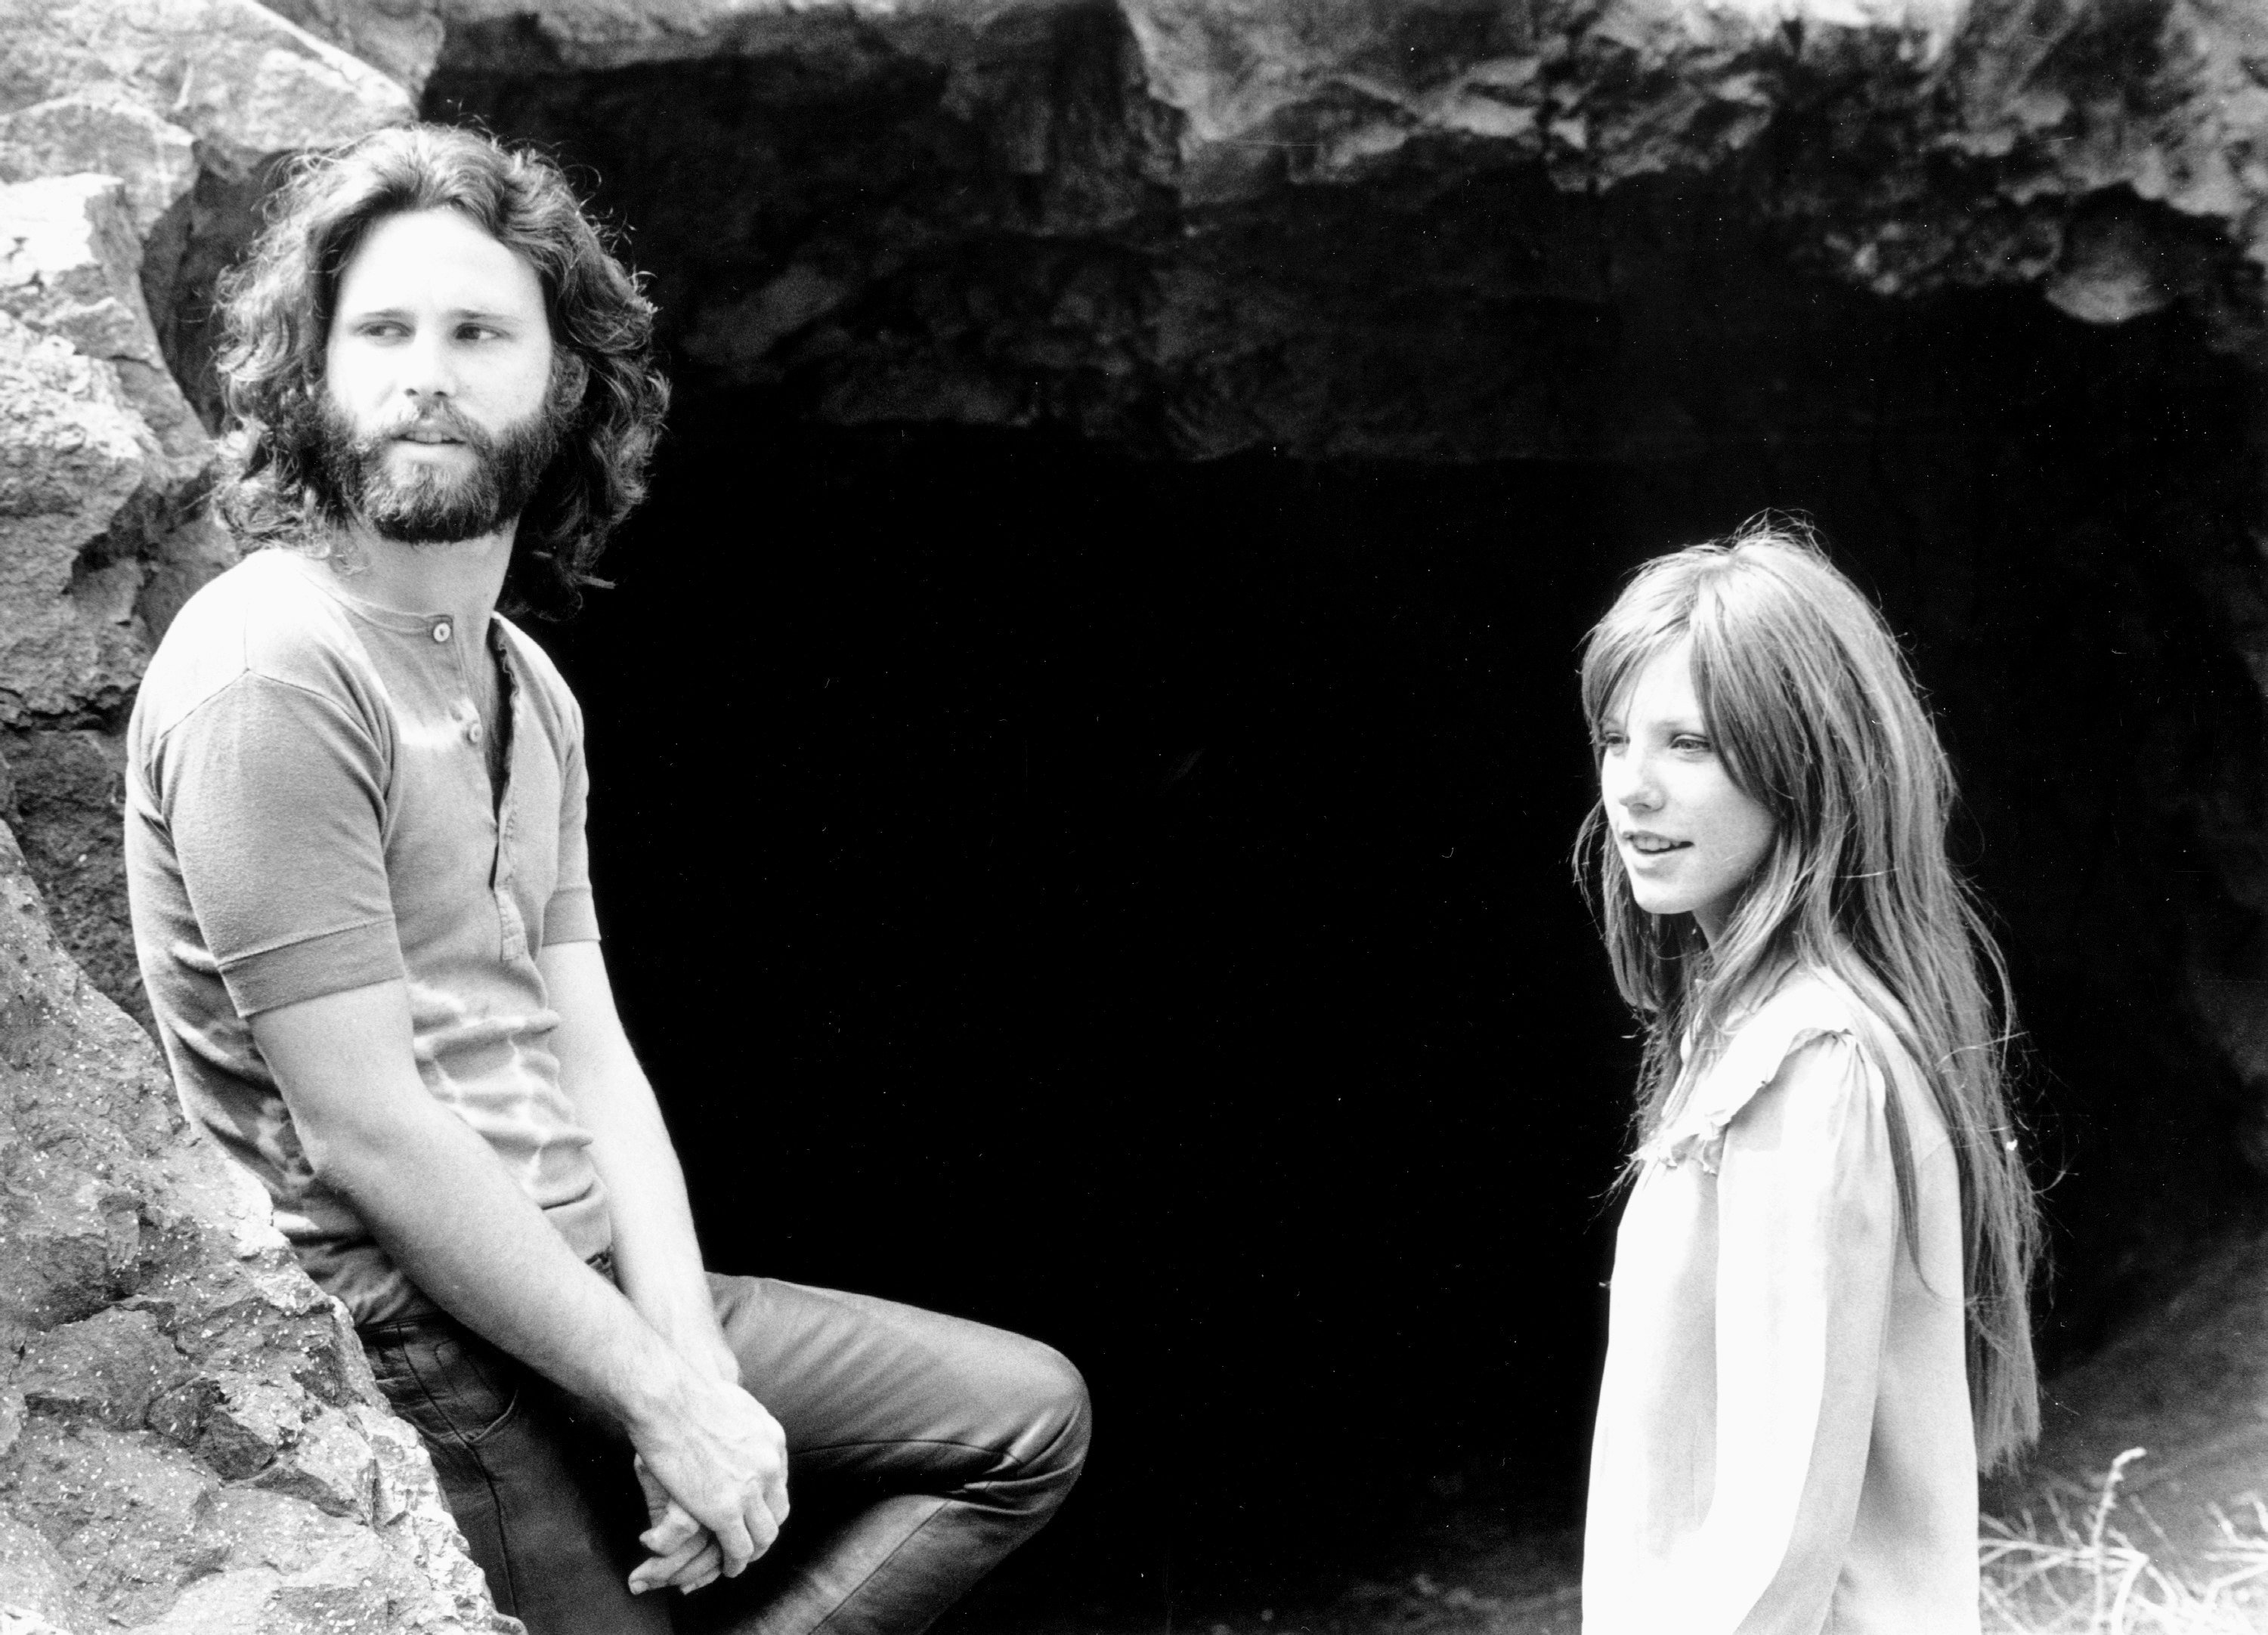  Singer Jim Morrison of The Doors with girlfriend Pamela Courson during a 1969 photo shoot at Bronson Caves in the Hollywood Hills, California. | Source: Getty Images